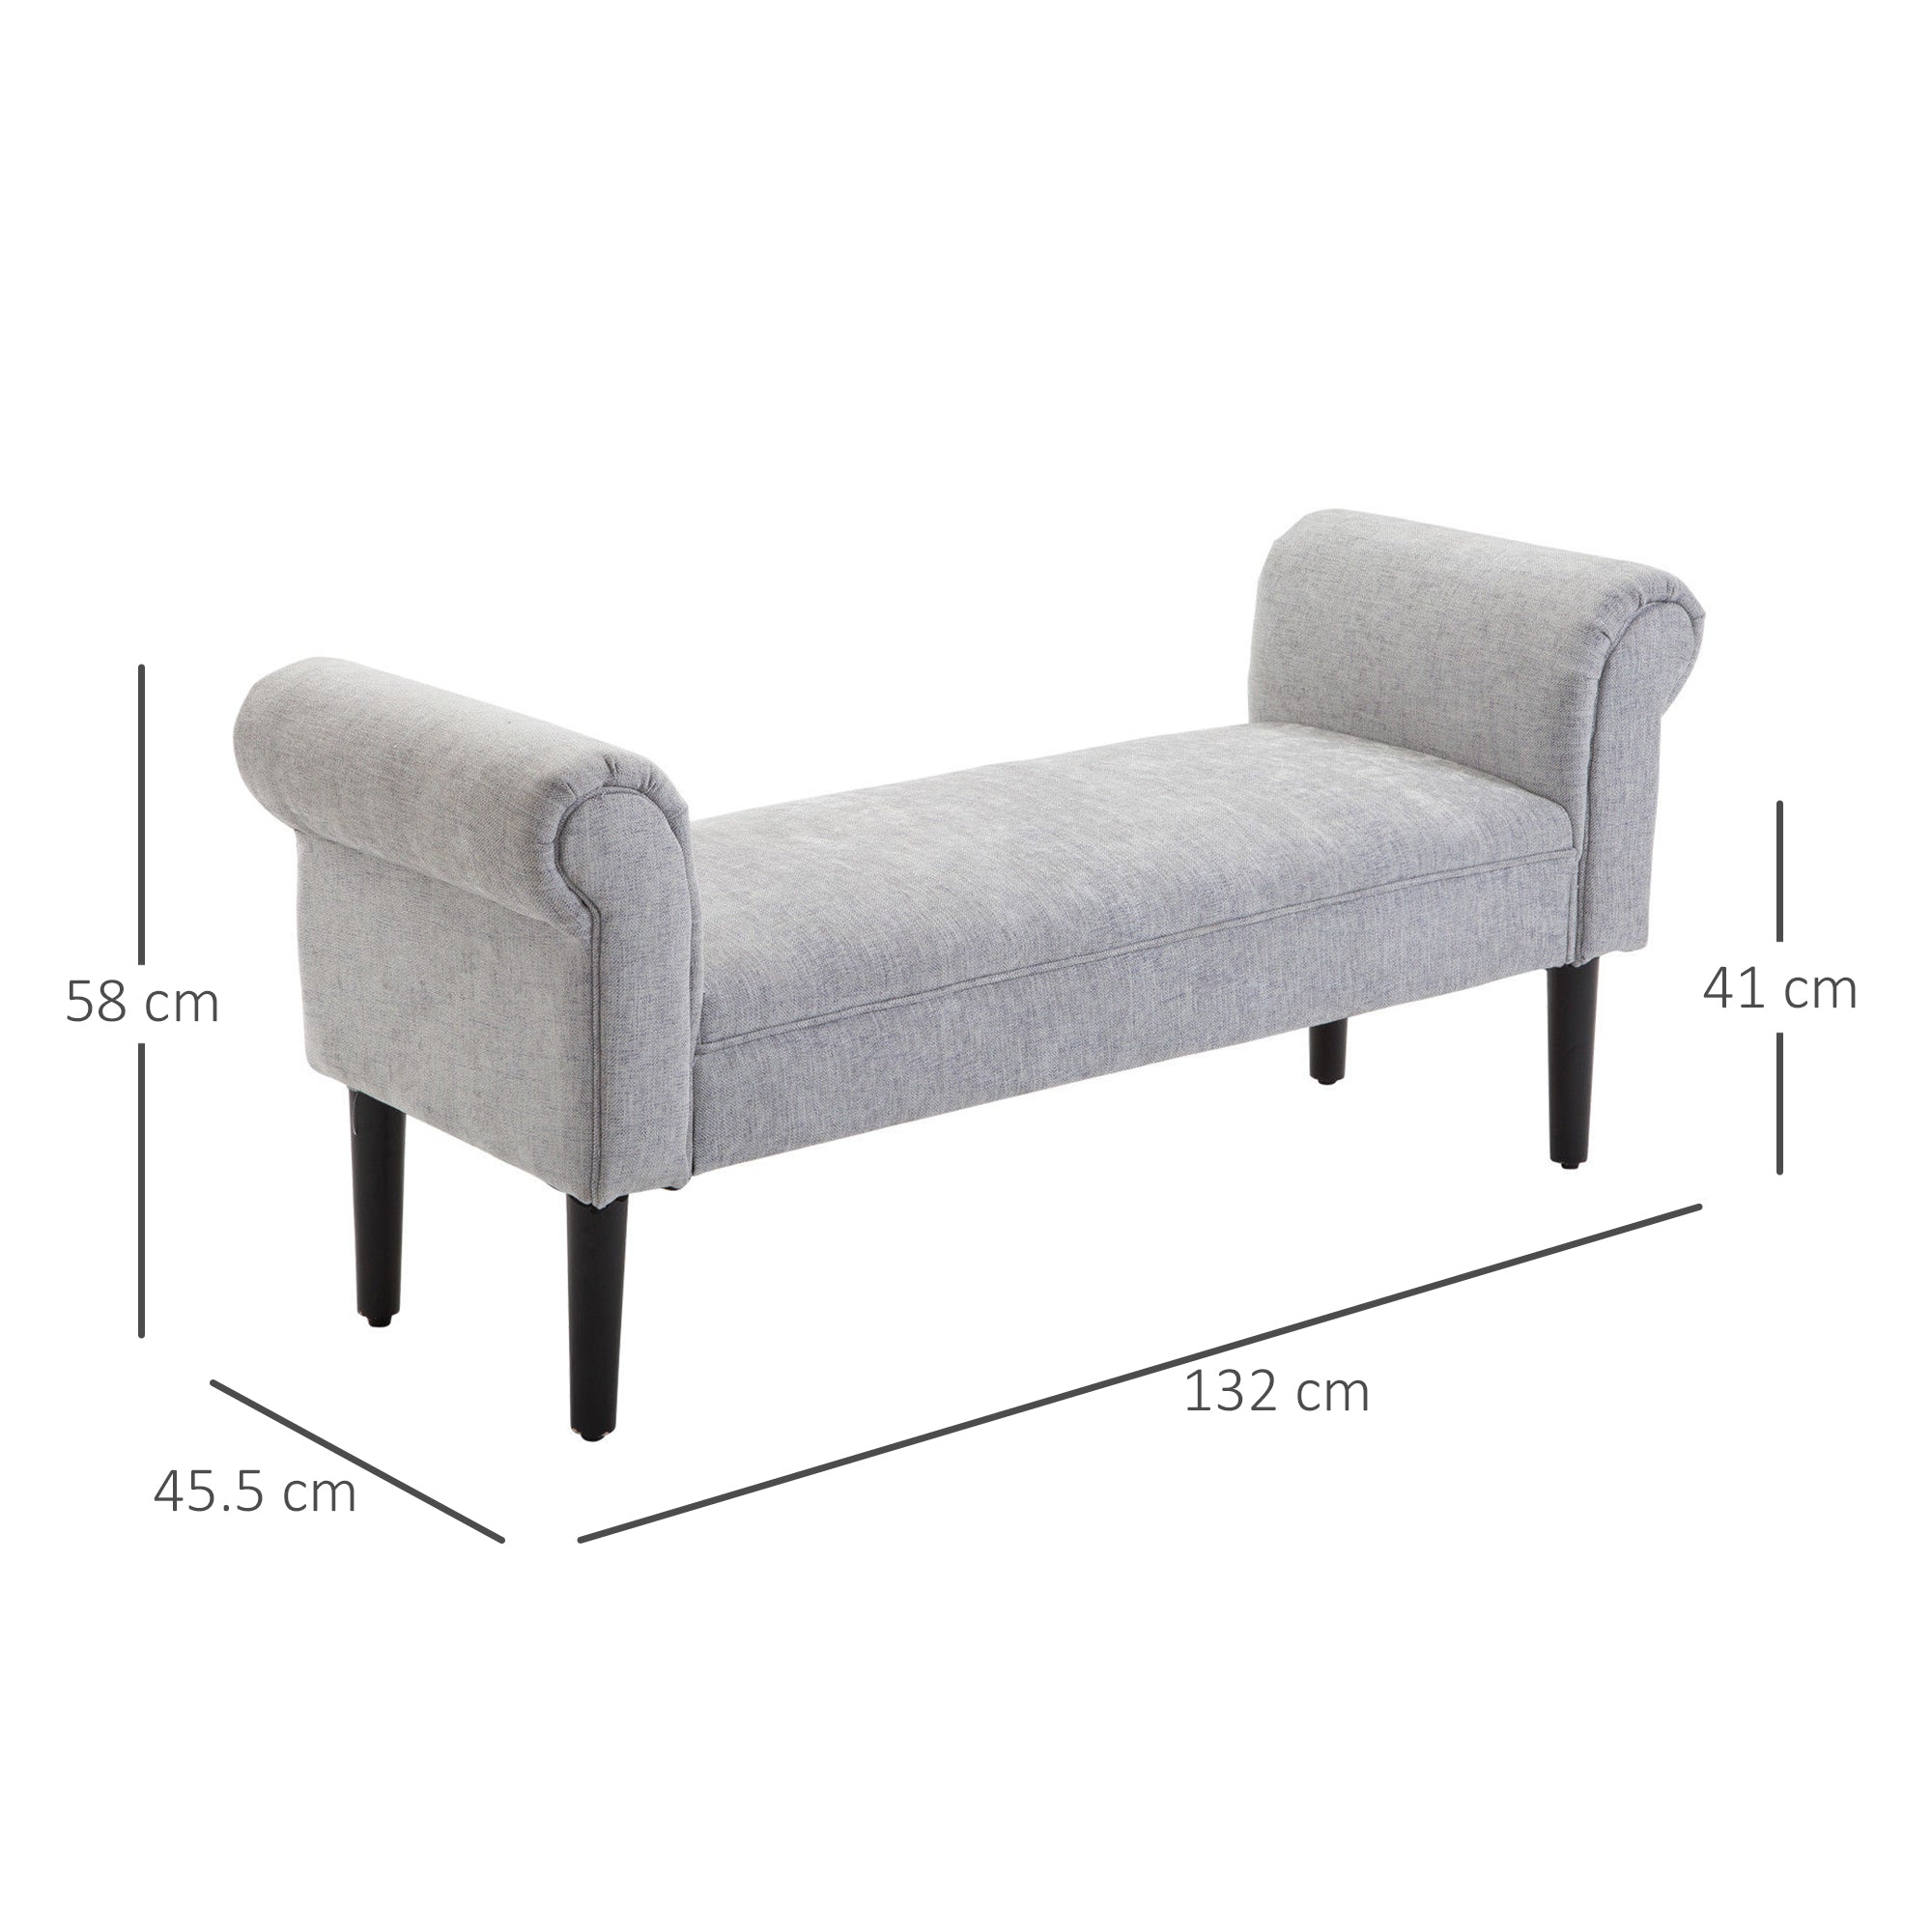 HOMCOM Bed End Side Chaise Lounge Sofa Window Seat Arm Bench Wooden Leg Linen Fabric Cover Light Grey